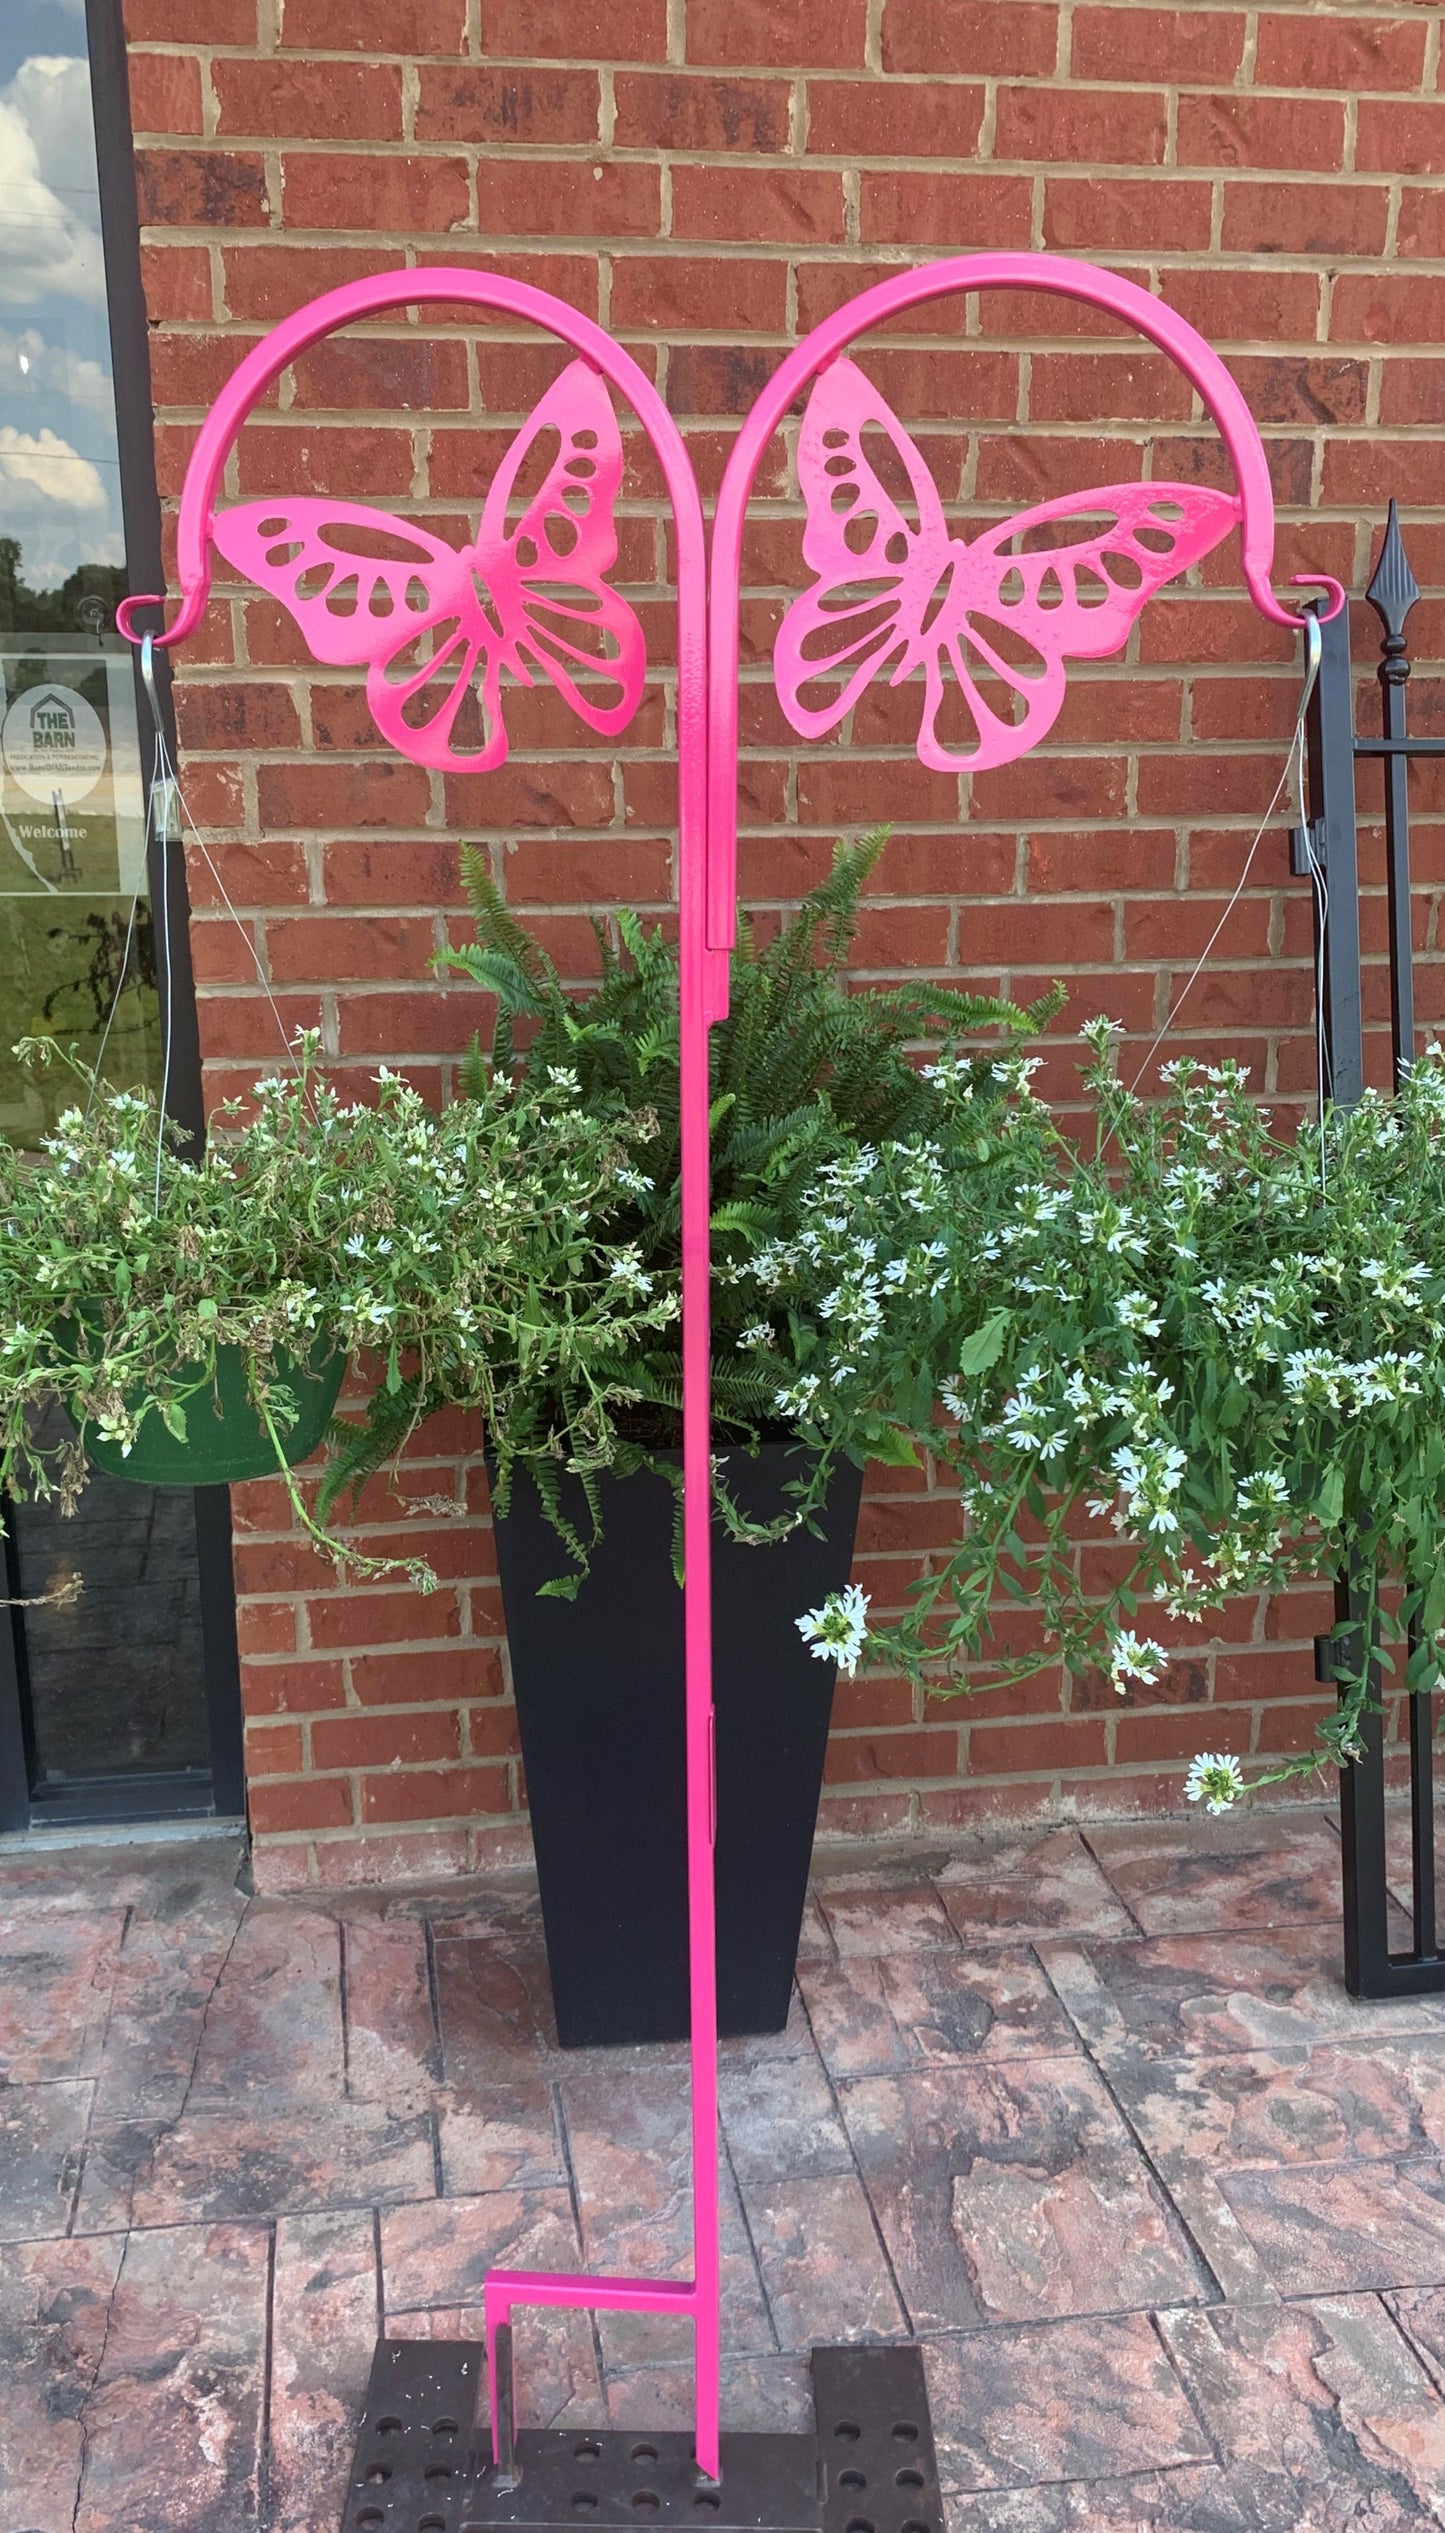 Double Butterfly Shepherd Hook- Your color choice-Four Display optons